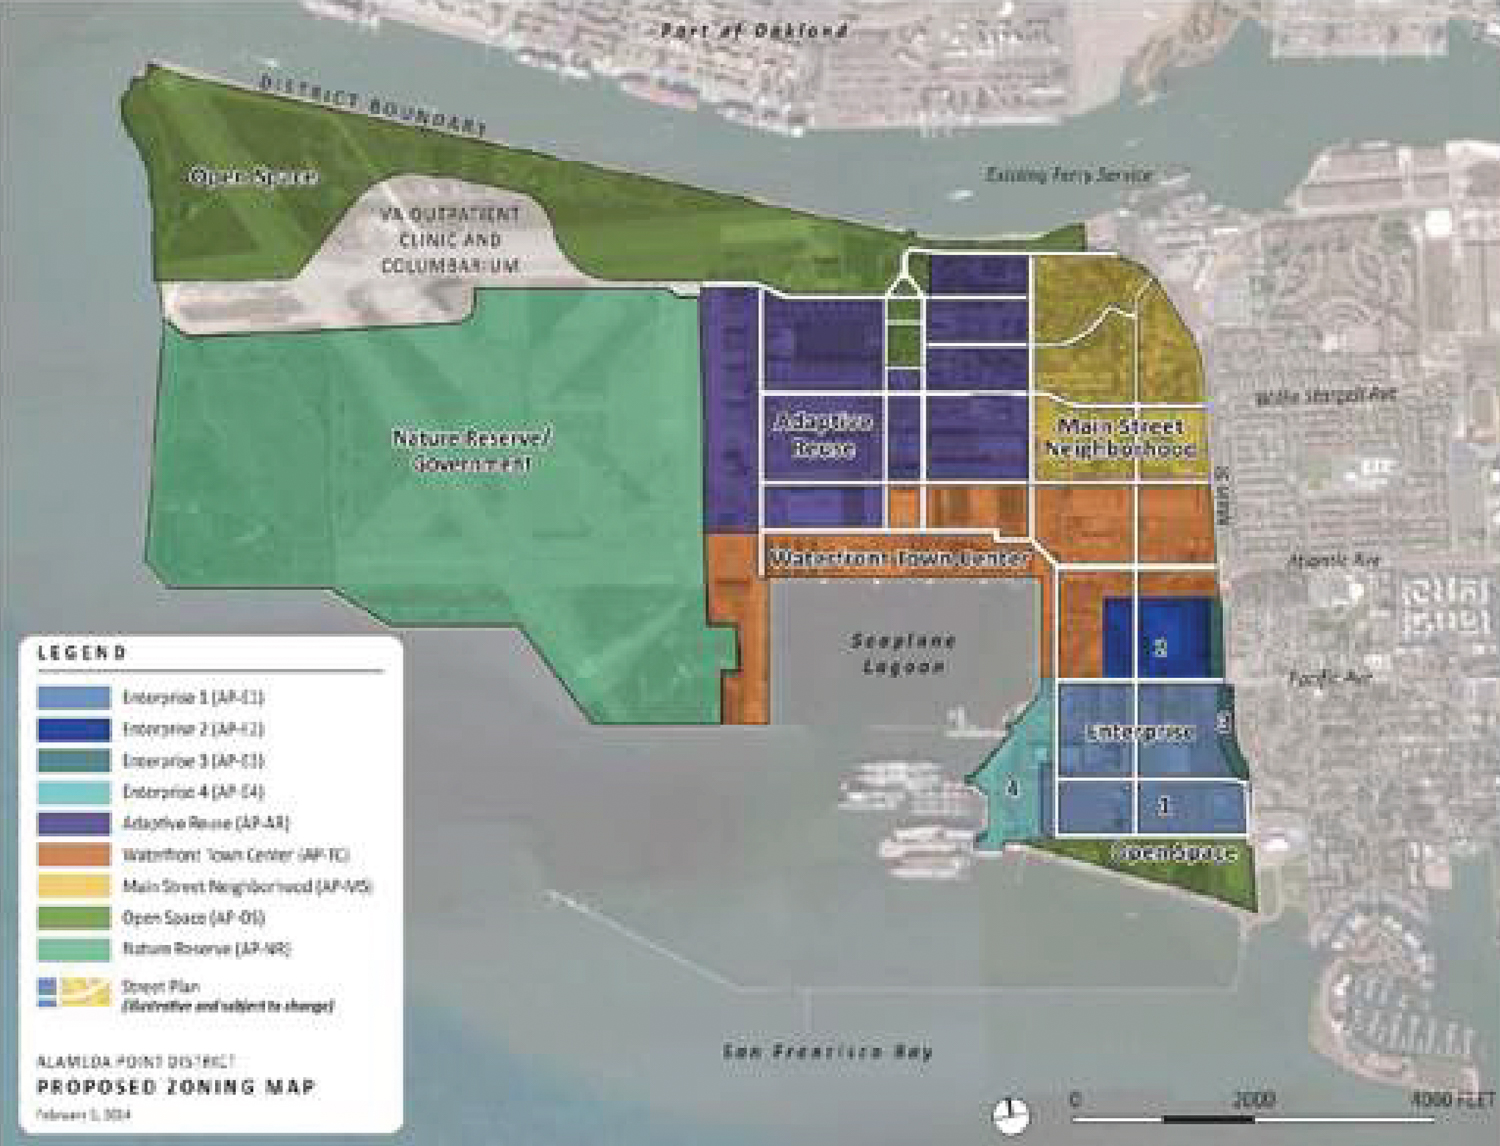 Alameda Point zoning map, illustration from project plans